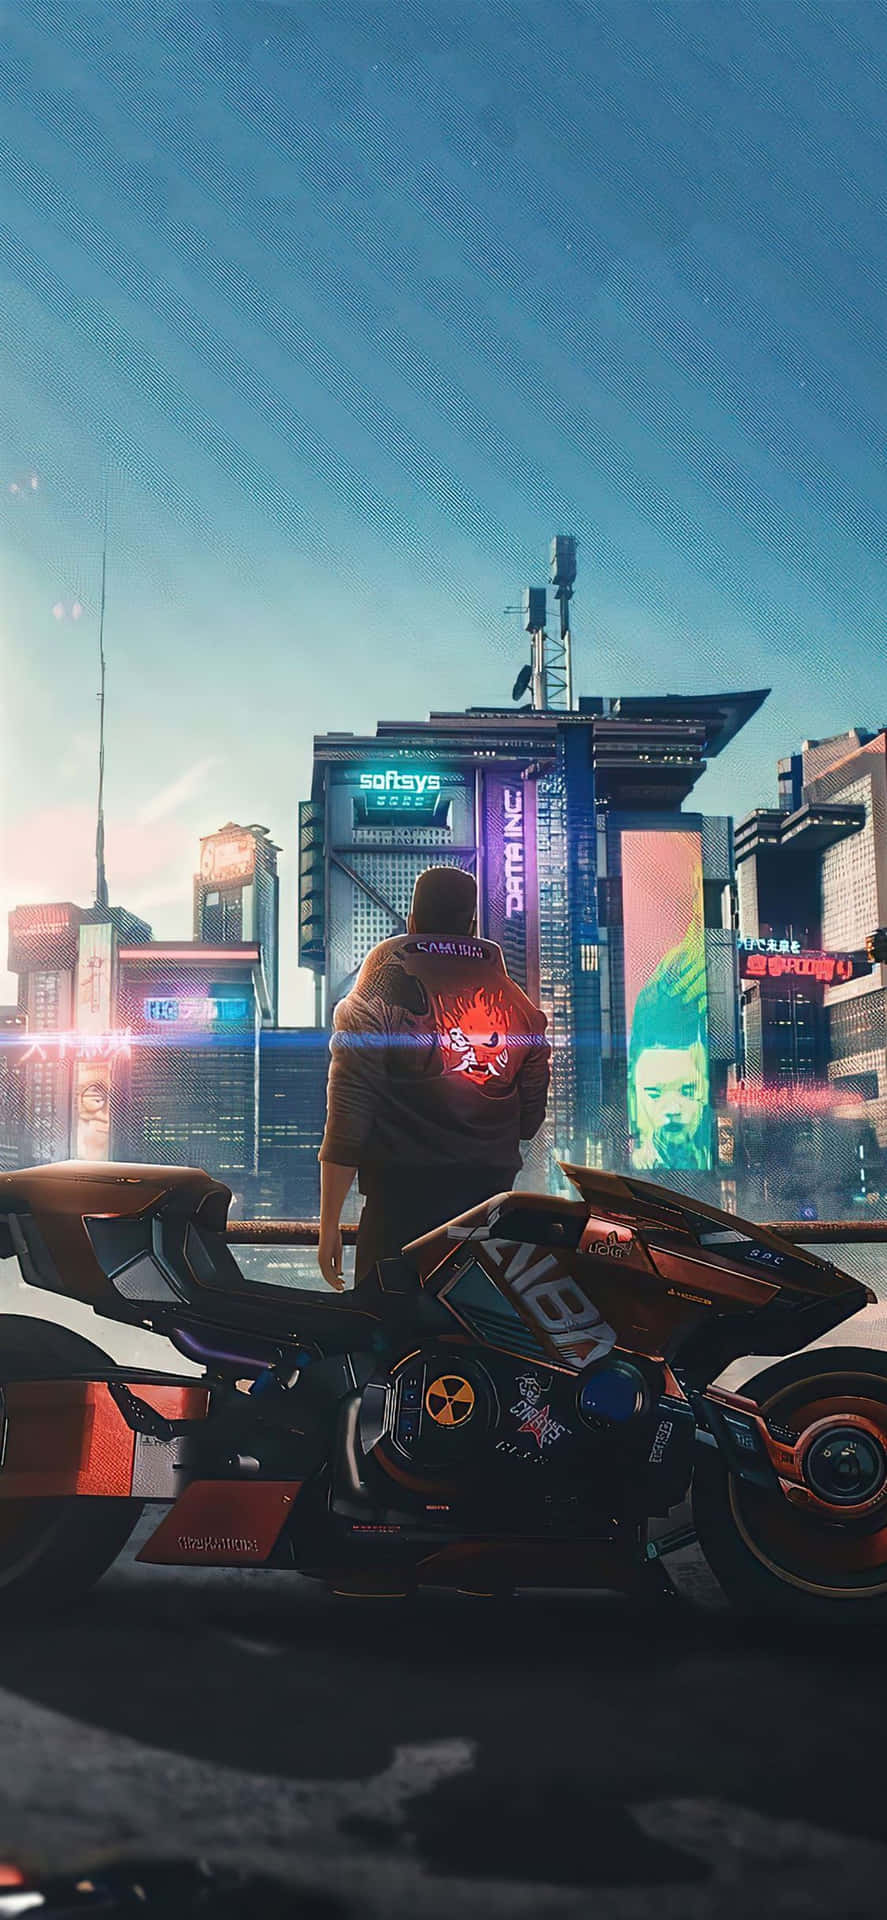 Iphone X Cyberpunk 2077 Background Man With A Motorcycle